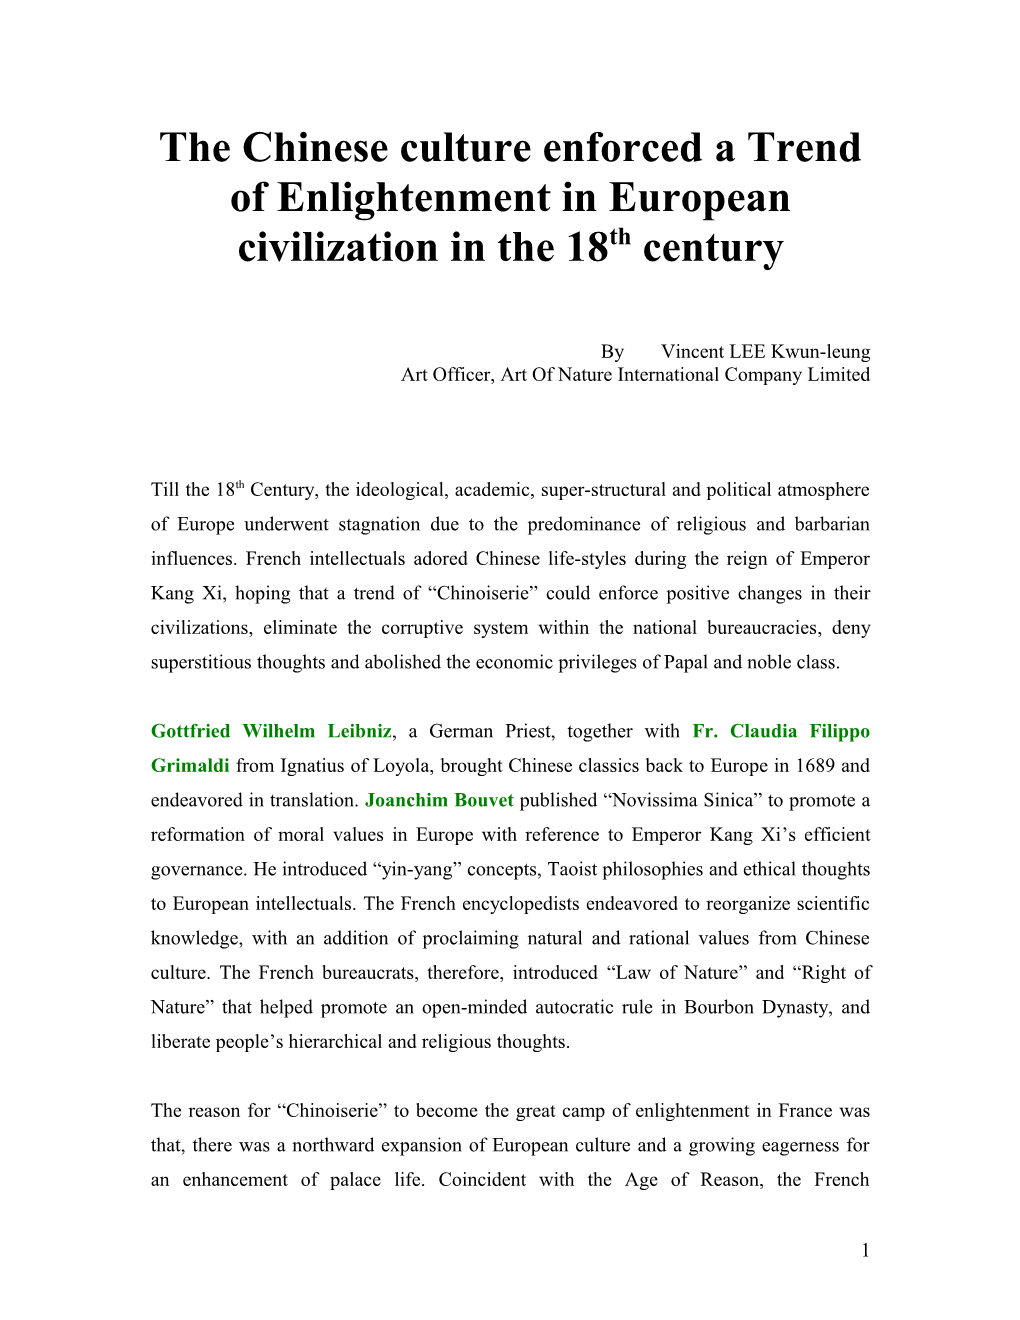 The Chinese Culture Enforced a Trend of Enlightenment in European Civilization in the 18Th